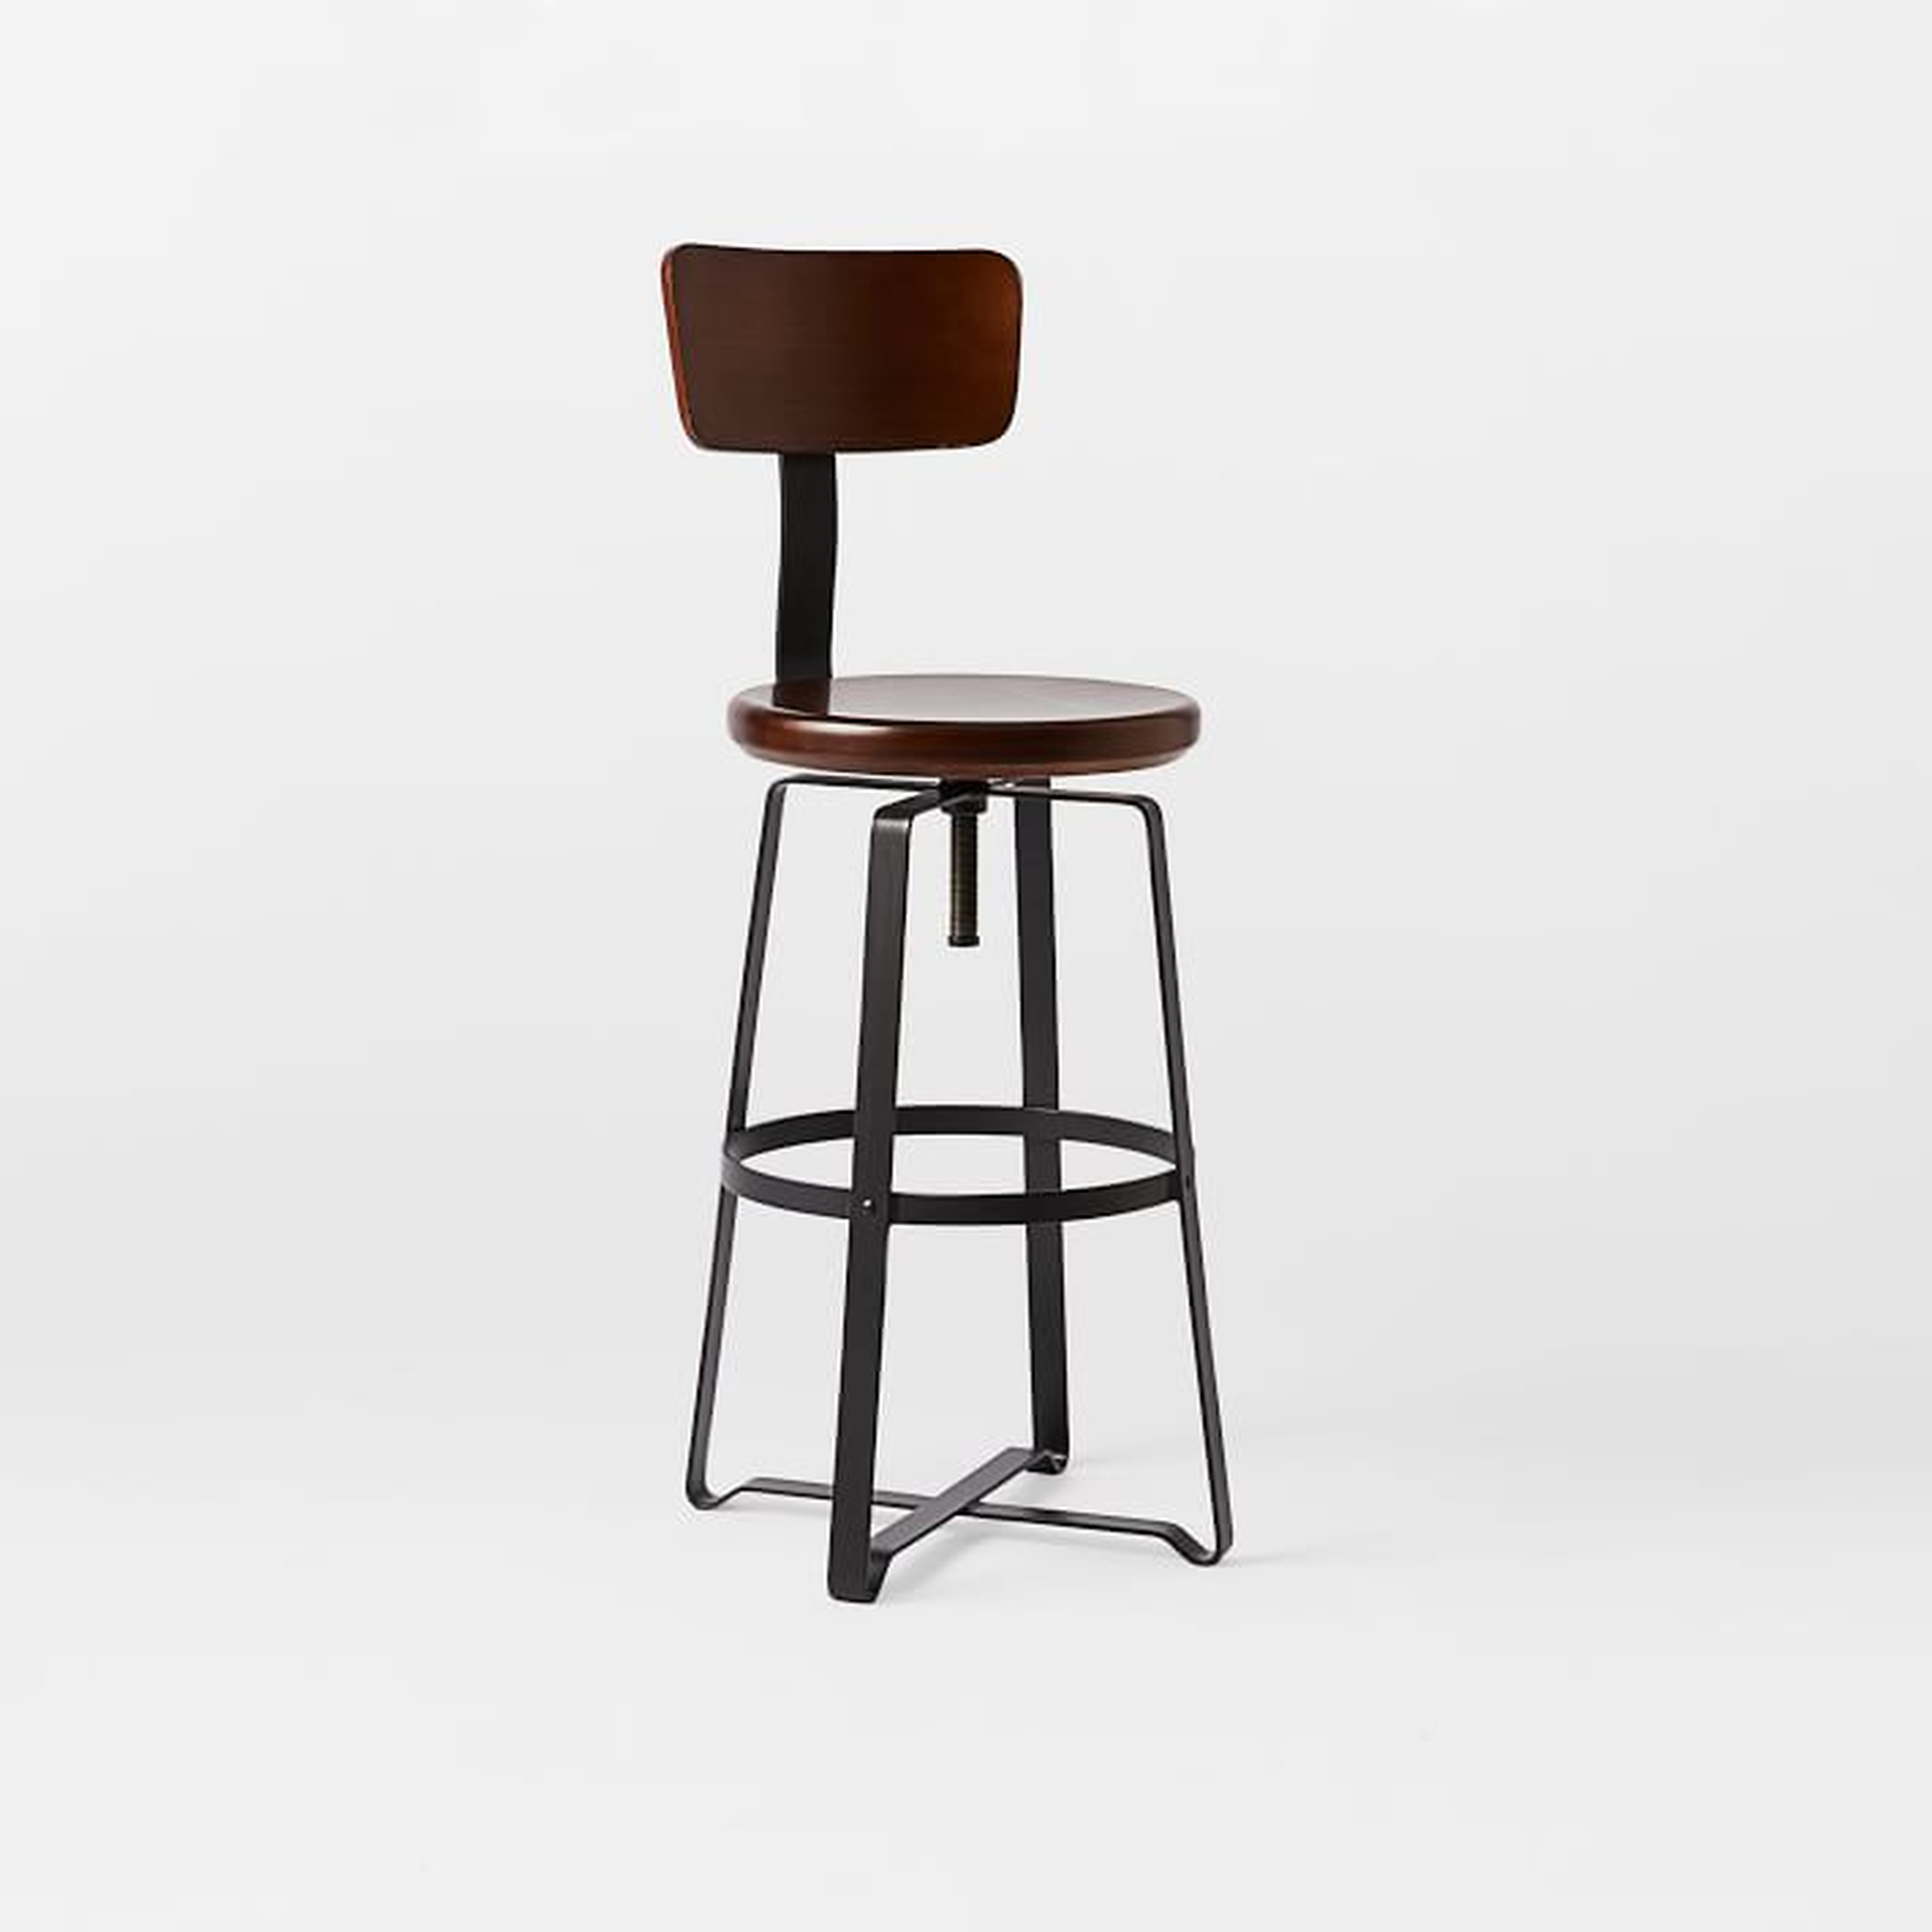 Adjustable Rustic Industrial Stool - With Back - West Elm